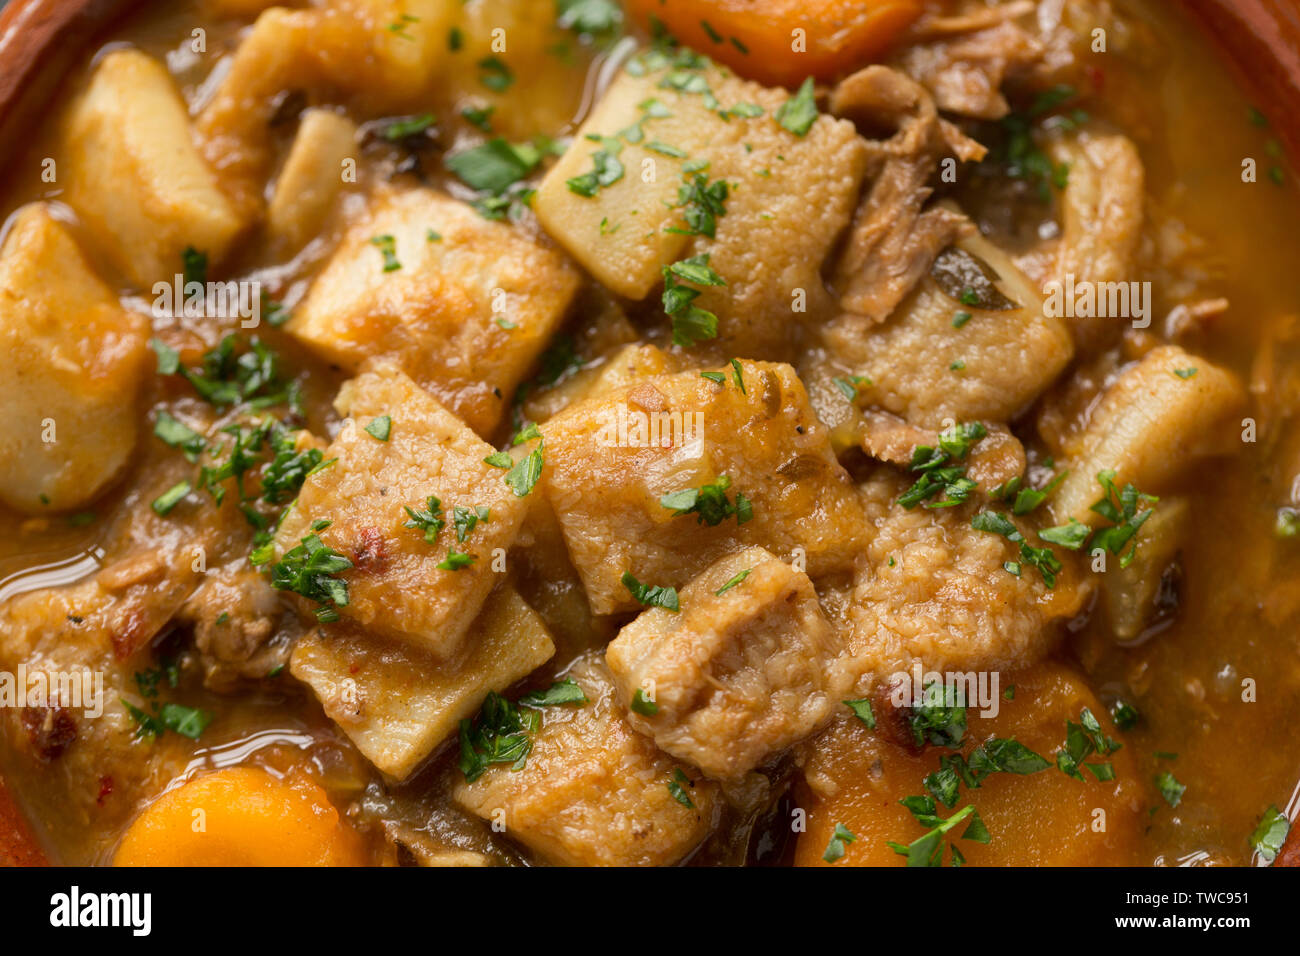 A meat stew made from roe deer venison, vegtables and herbs to which cubes of ox tripe have been added. England UK GB Stock Photo